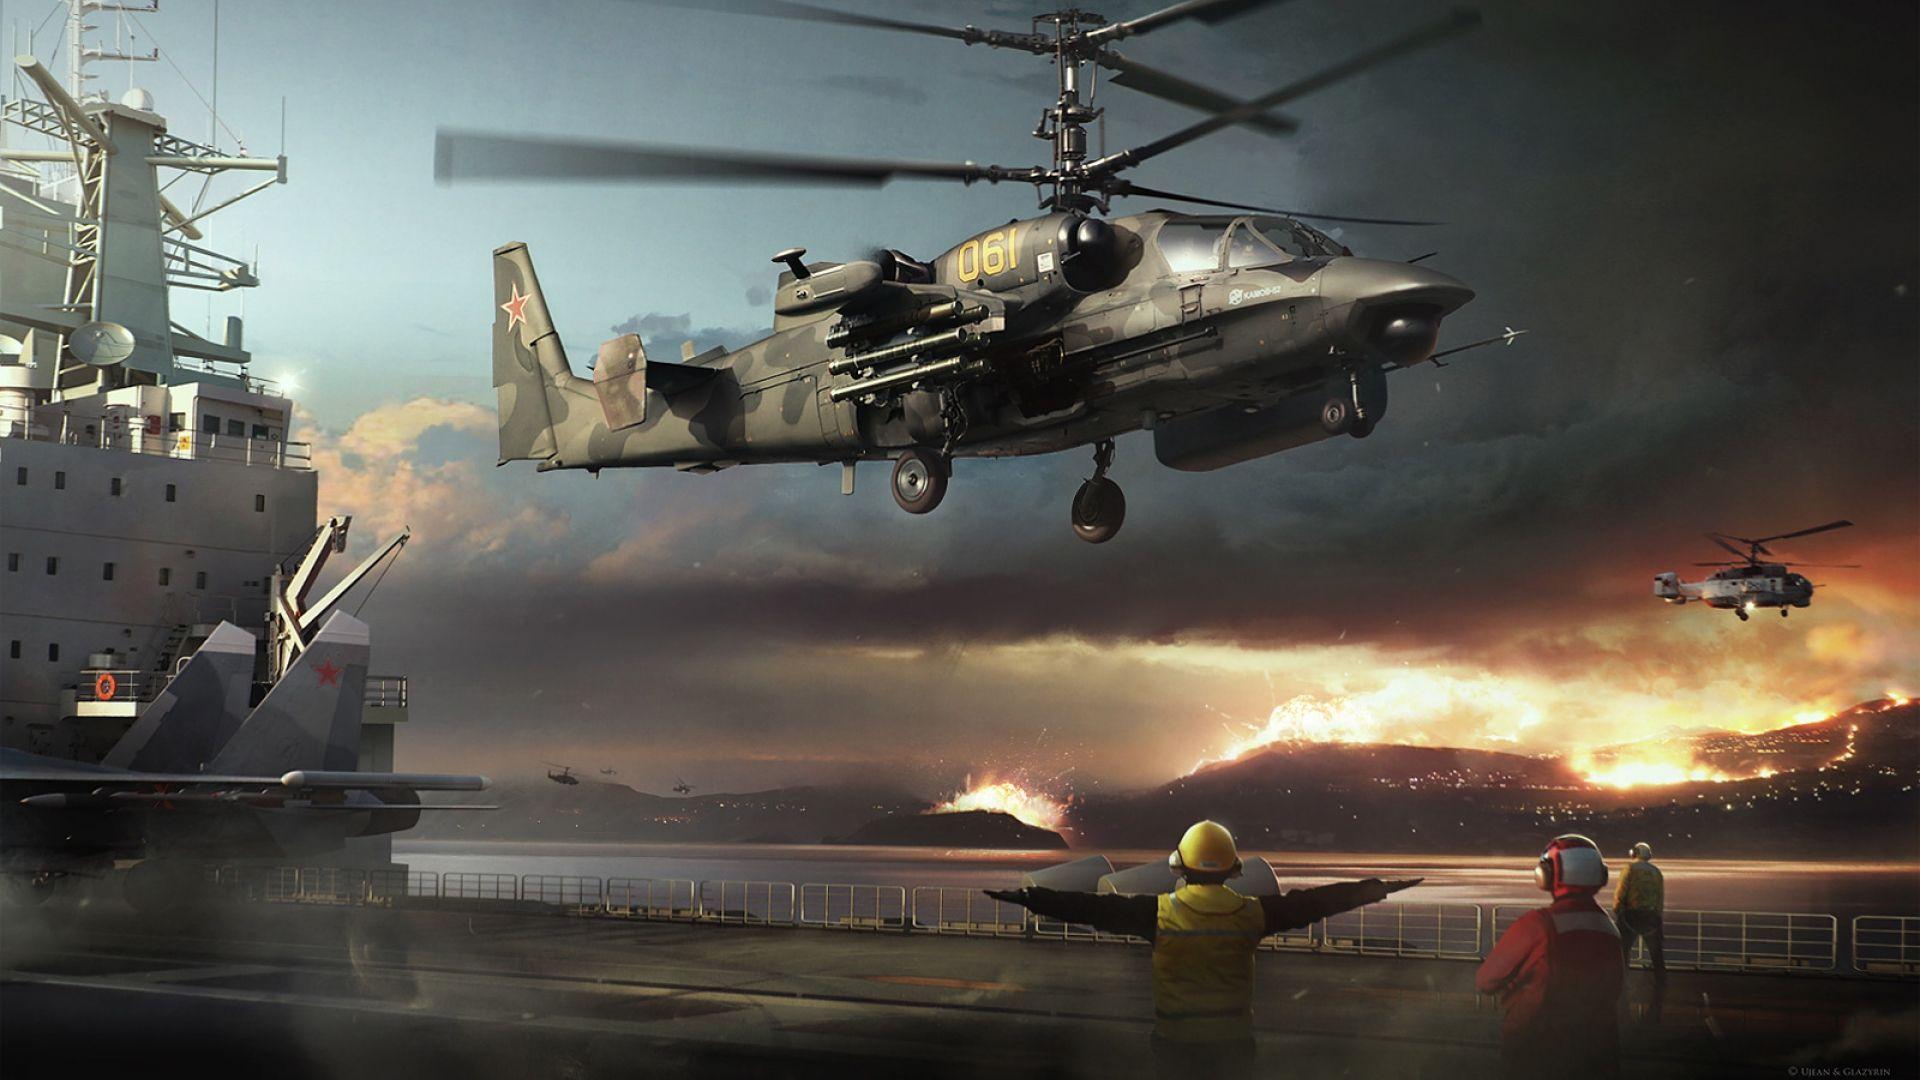 Helicopter Concept Art wallpaper 136730